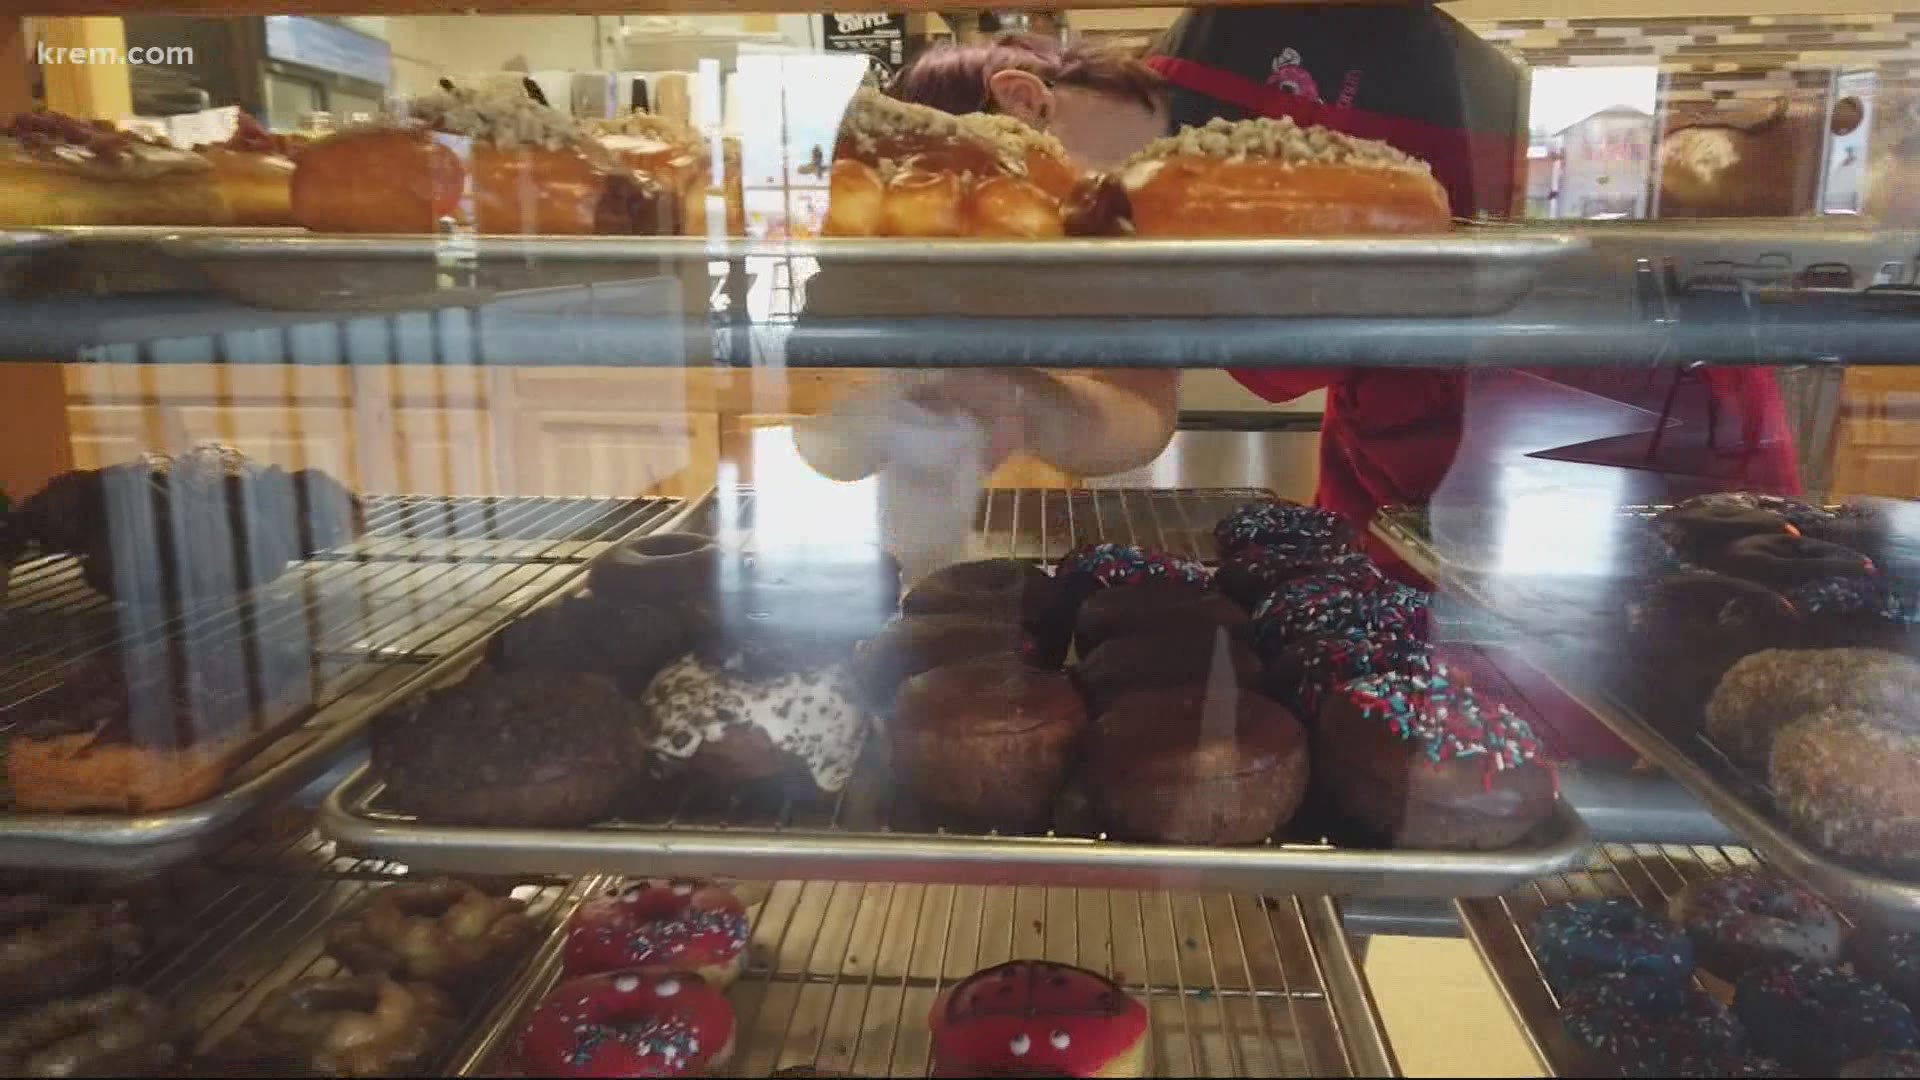 Gross Donuts in Spokane is donating 100% of their proceeds on National Doughnut Day to New Beginnings